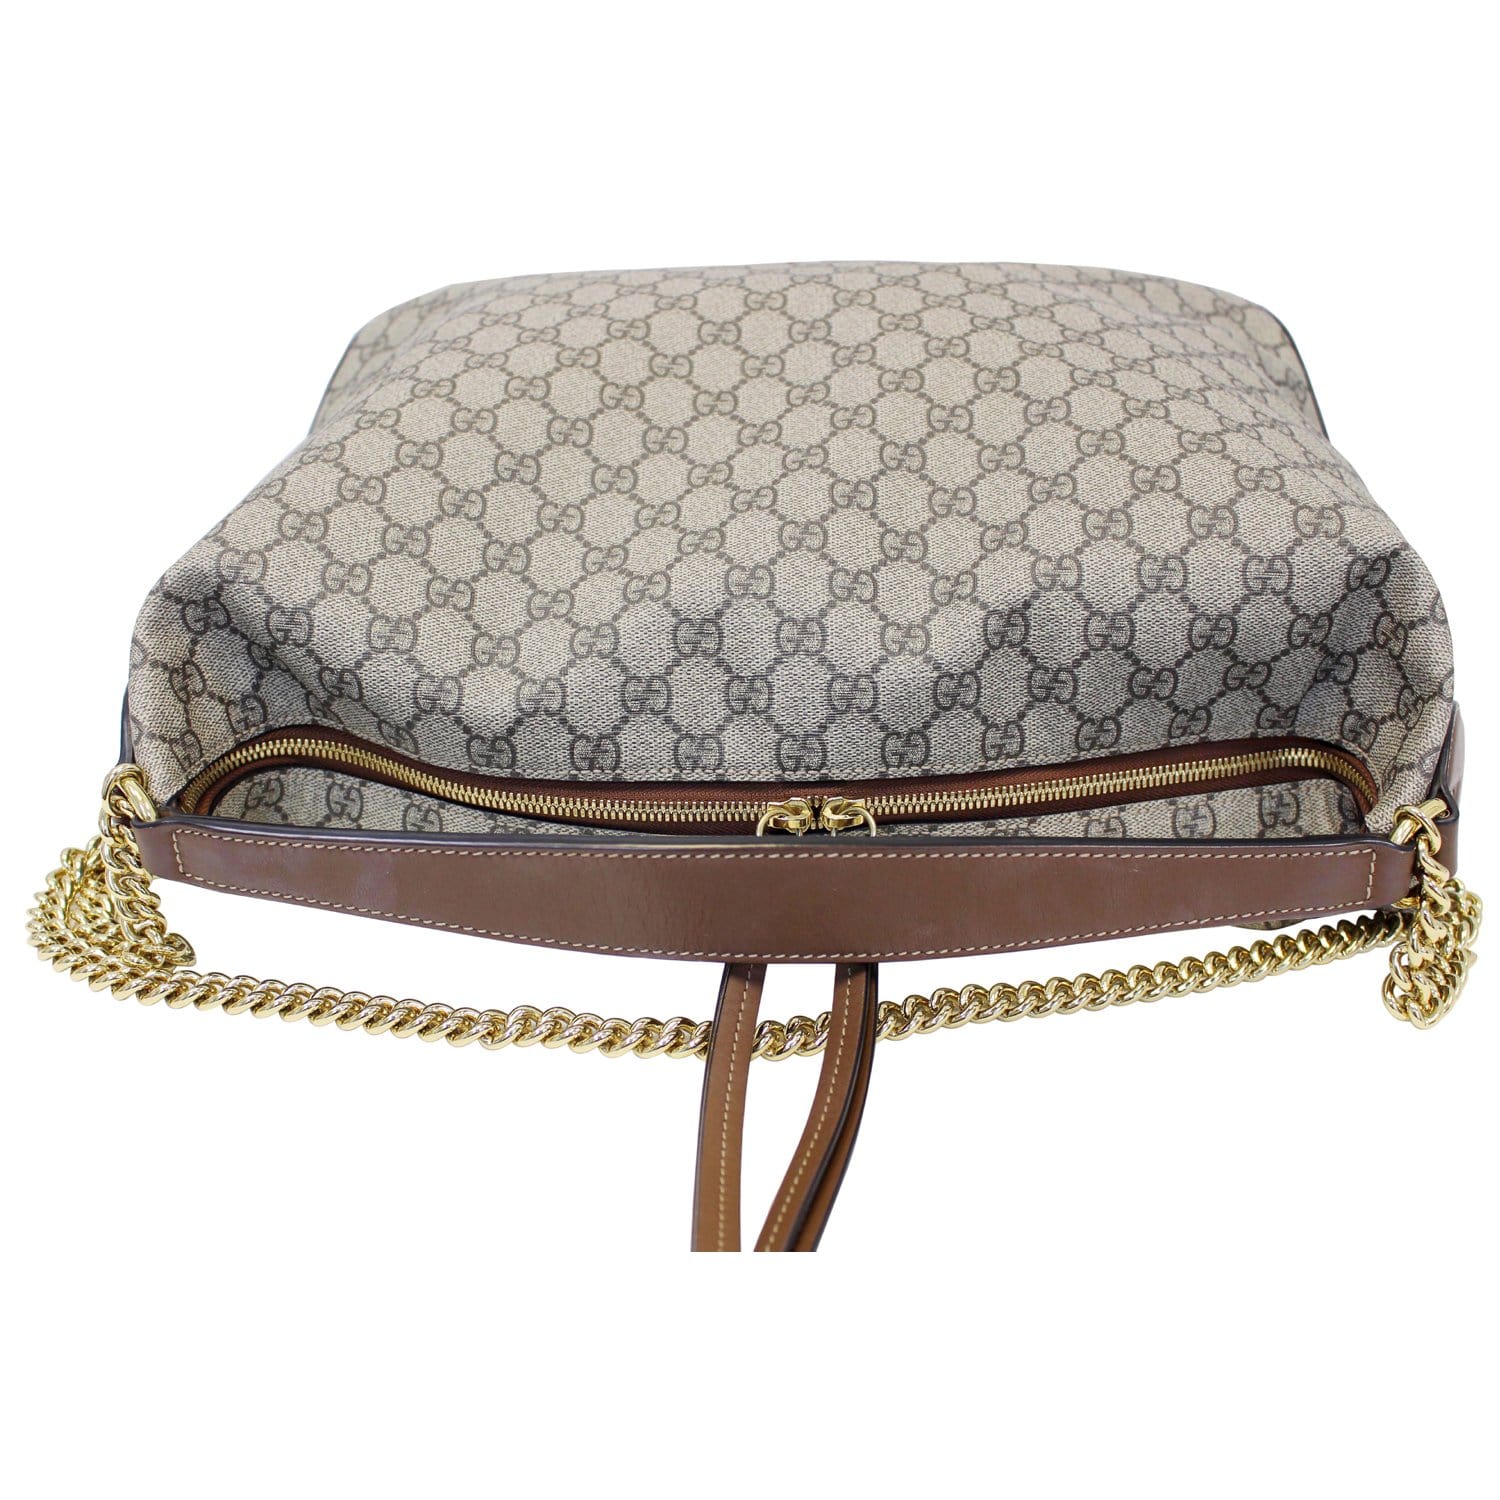 Brown Gucci GG Supreme Oval Clutch Bag, Gucci Soft Furnishings for Women